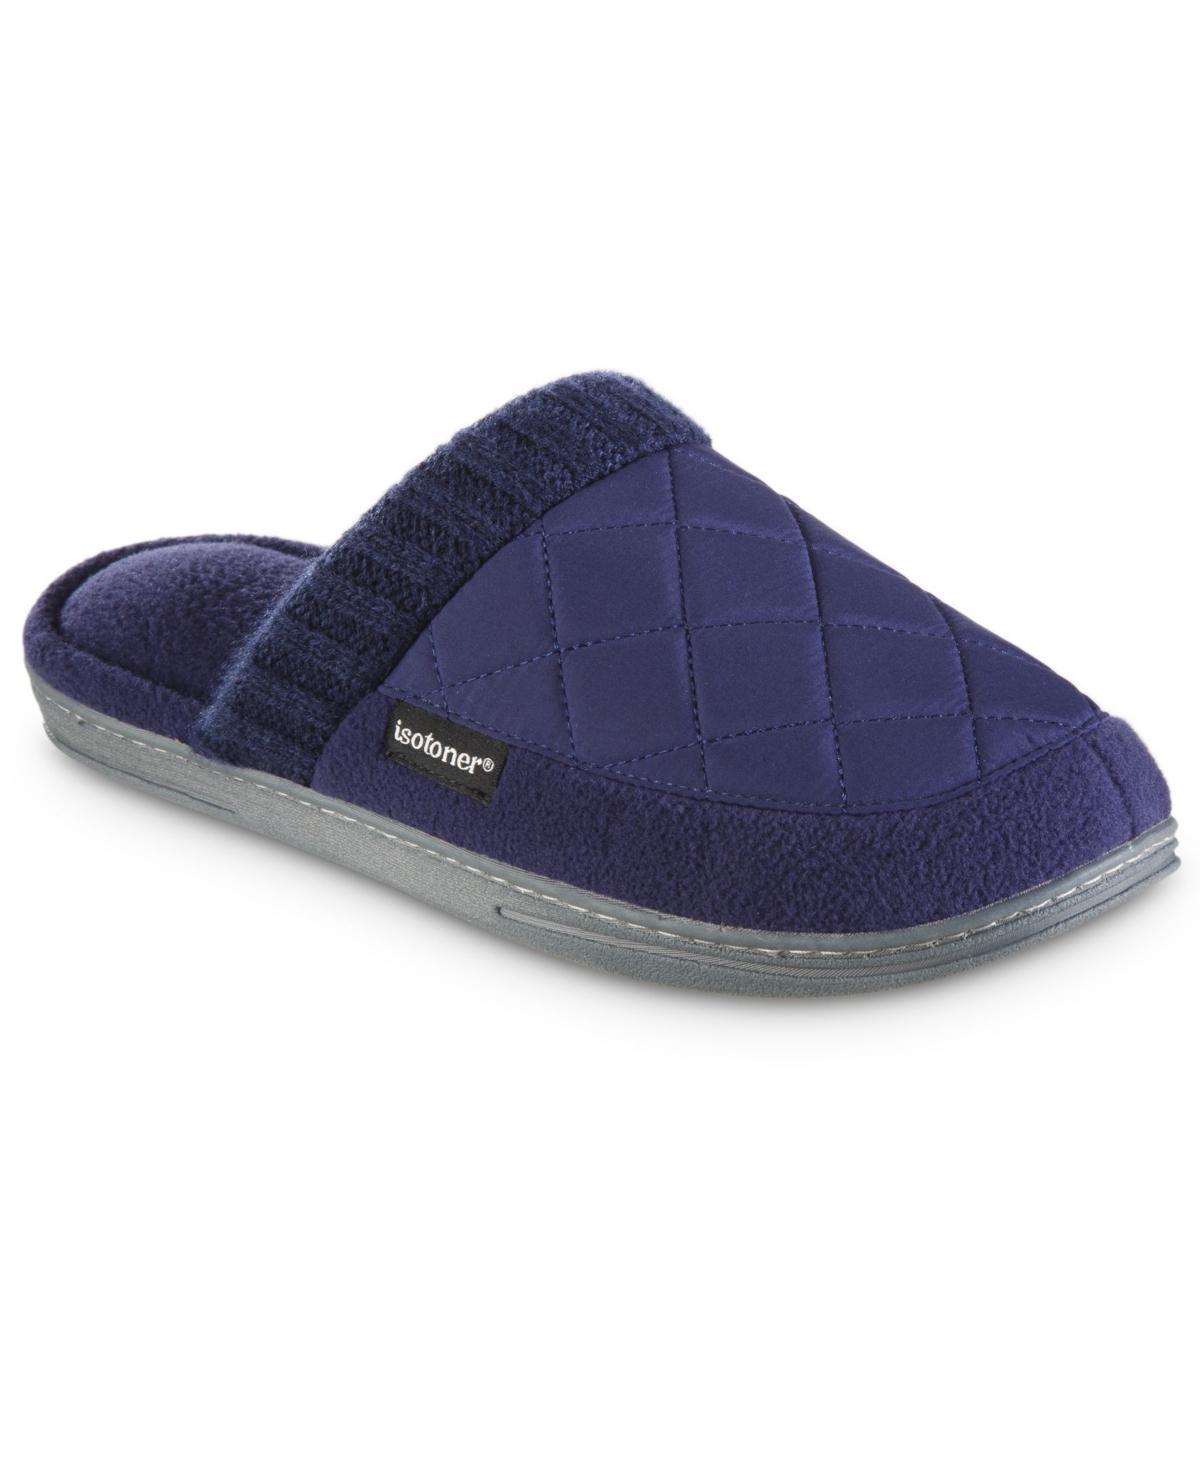 isotoner Levon Mens Quilted Clog Slippers Grey Product Image